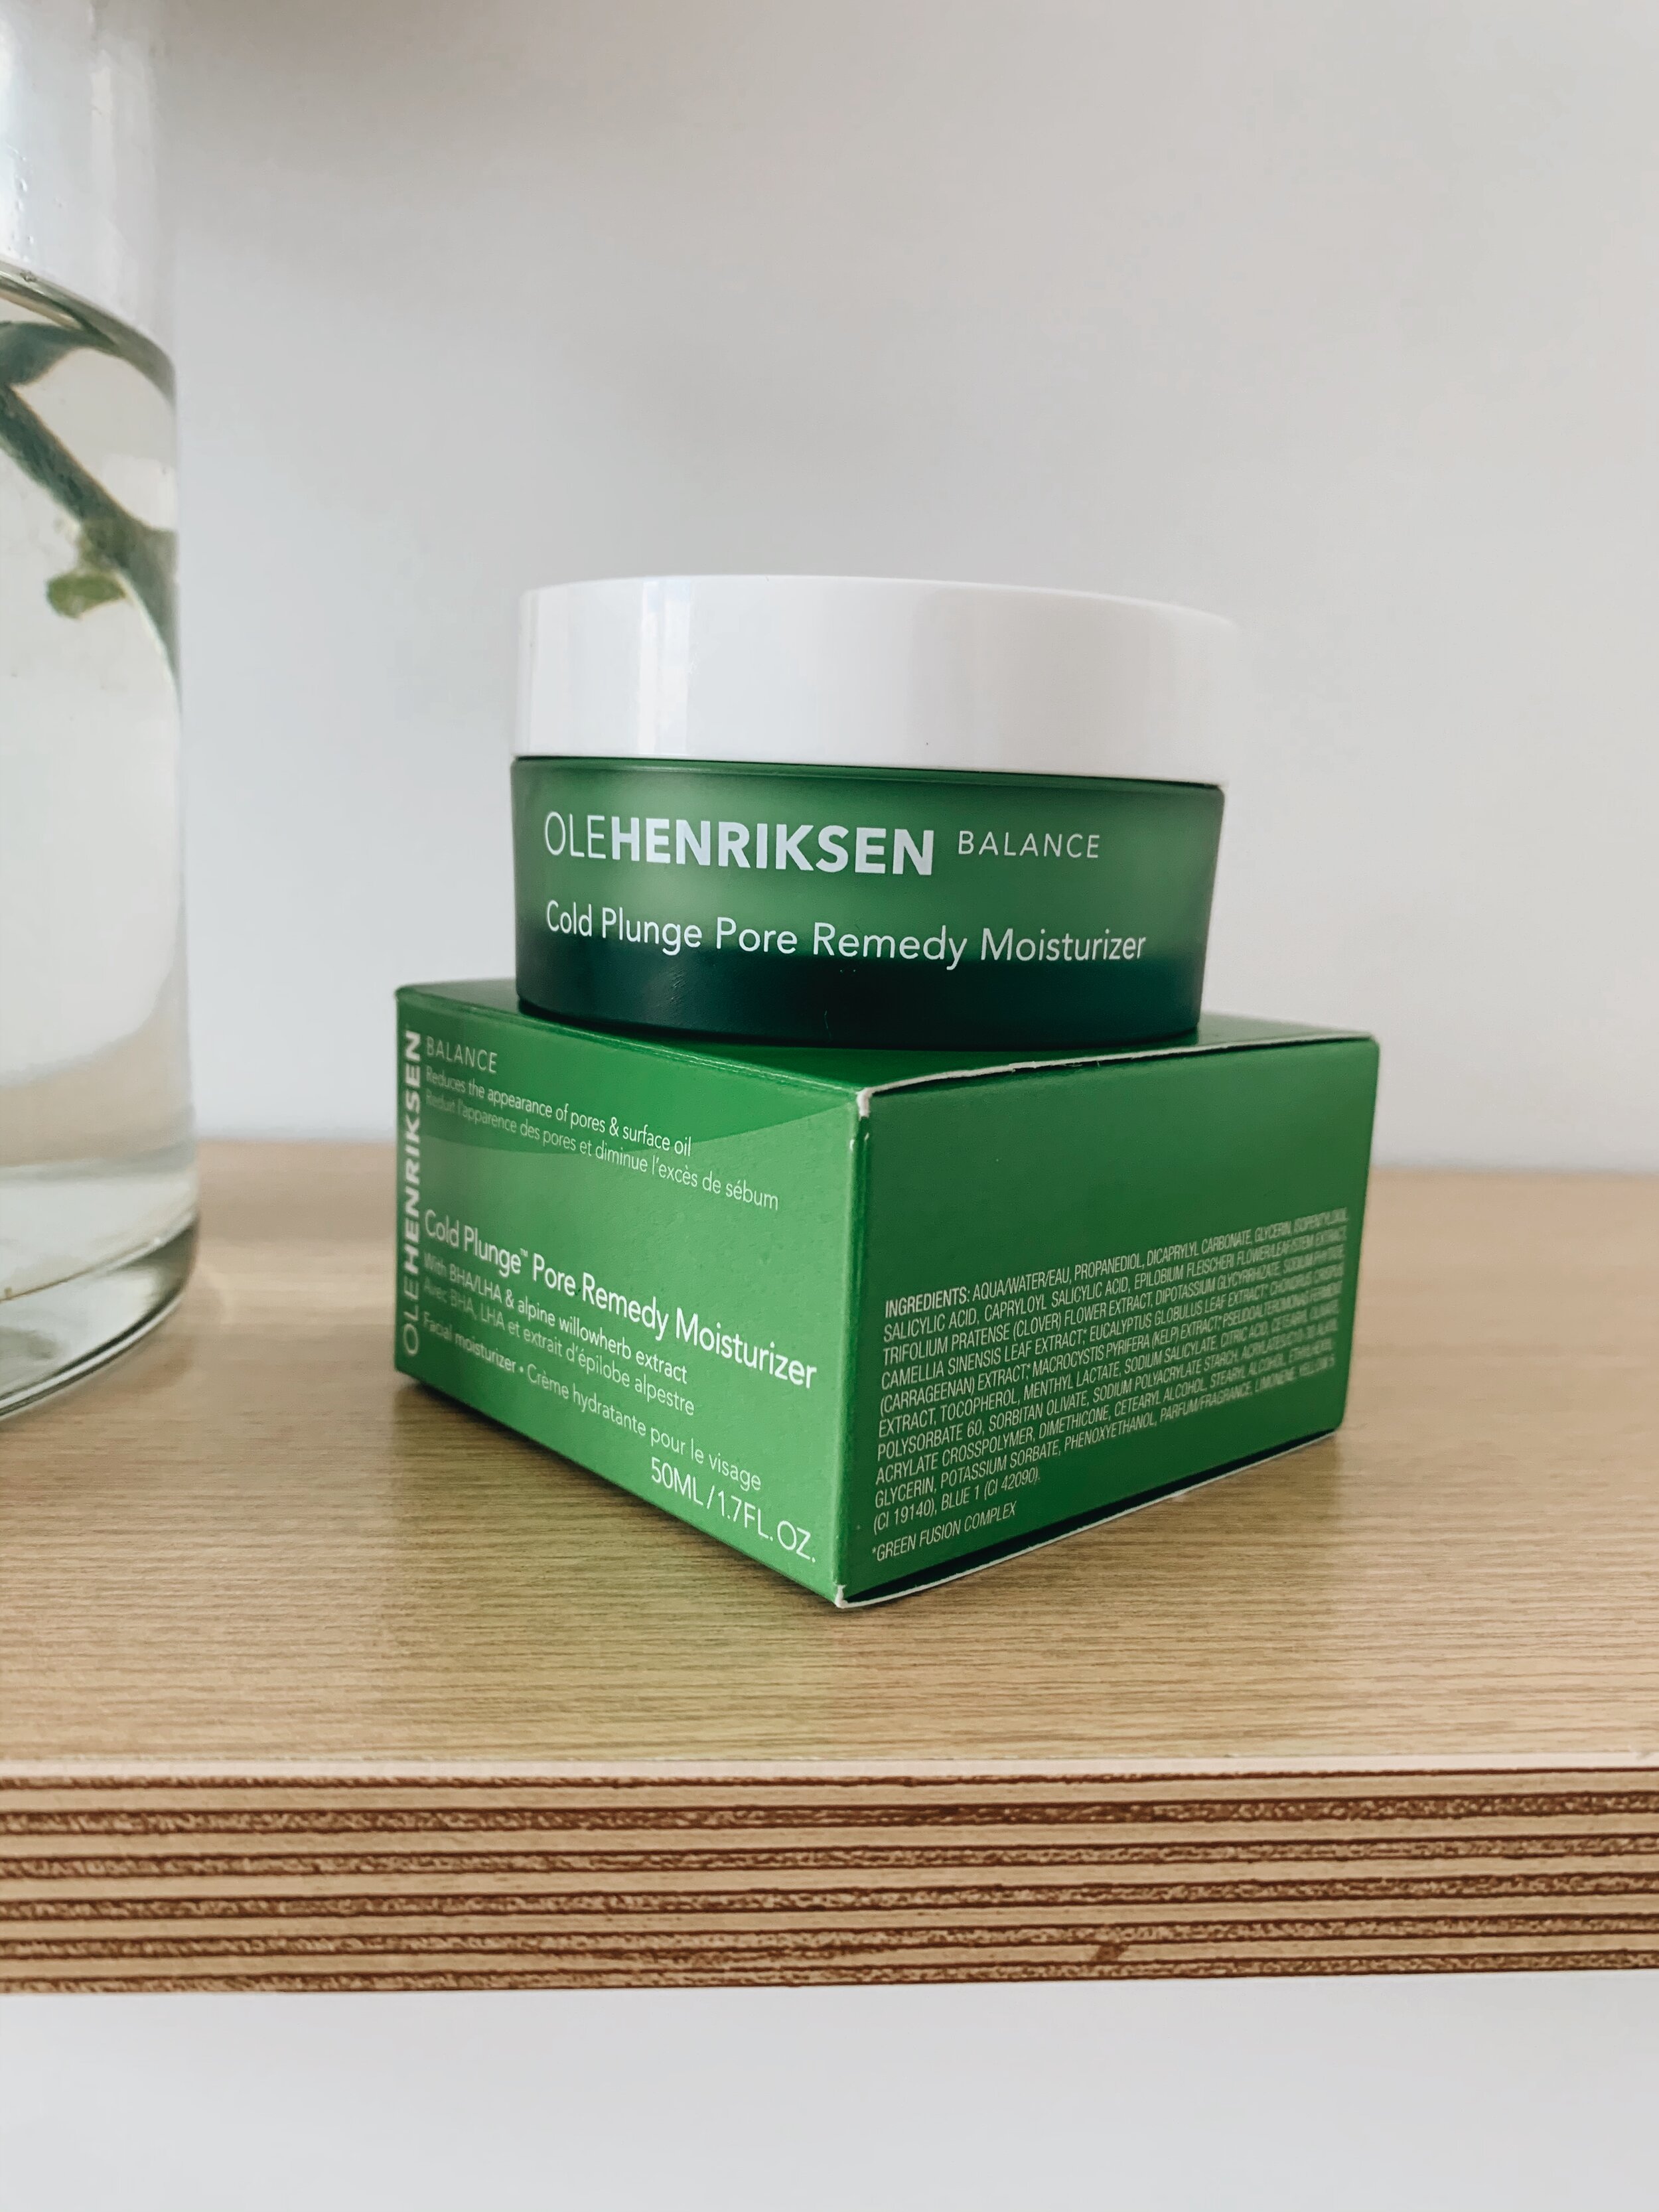 Definere Tyranny servitrice Take the Plunge: New Moisturizer From Ole Henriksen! — Bunting Beauty